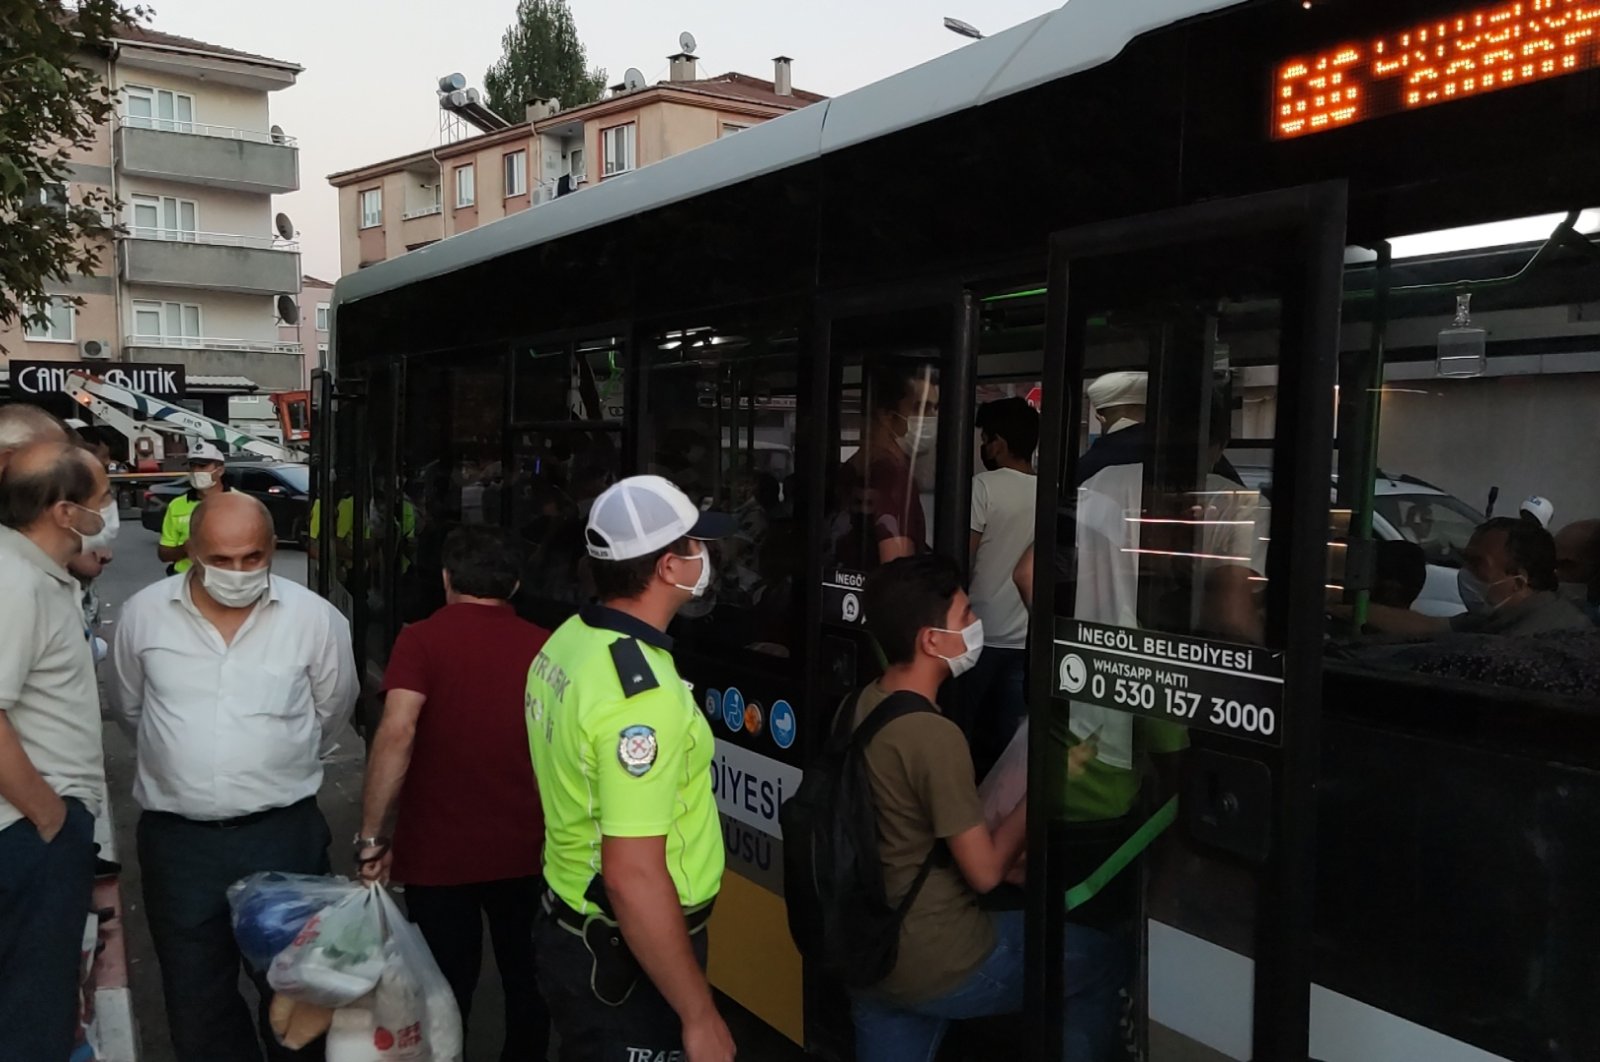 A police officer inspects for compliance with public transport rules in İnegöl district of Bursa, western Turkey, Sept. 11, 2020. (DHA Photo)